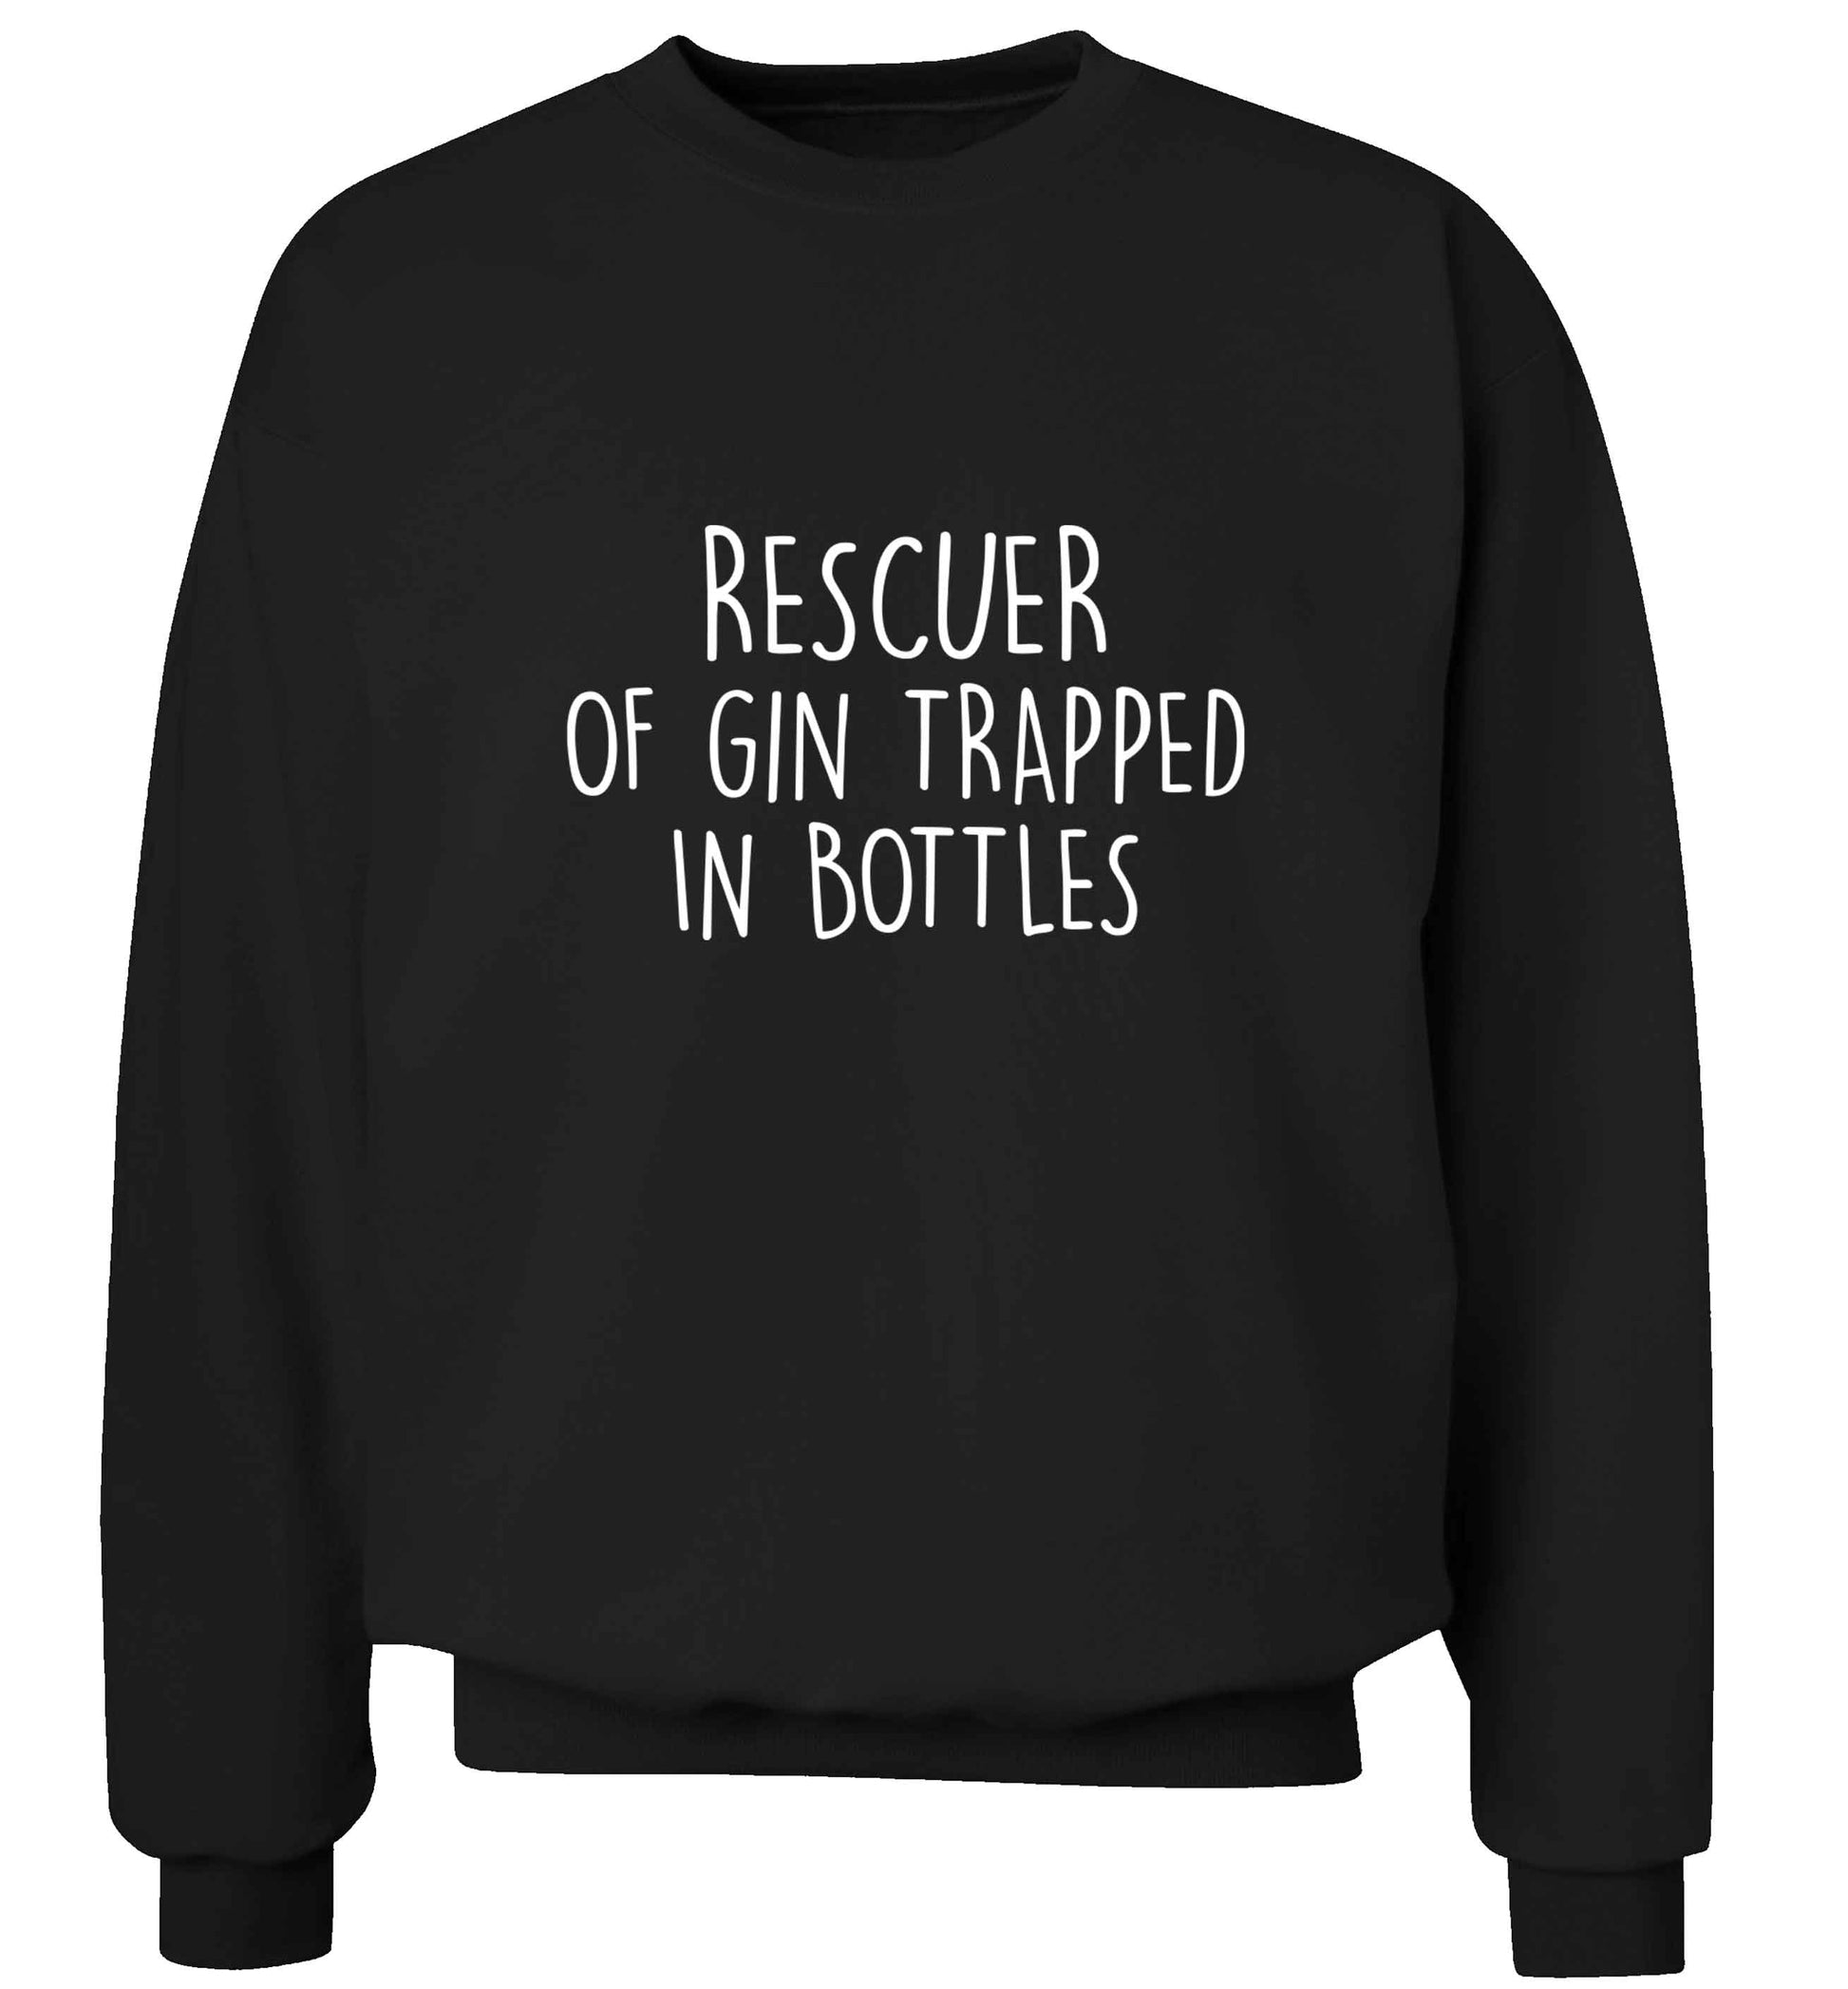 Rescuer of gin trapped in bottles adult's unisex black sweater 2XL